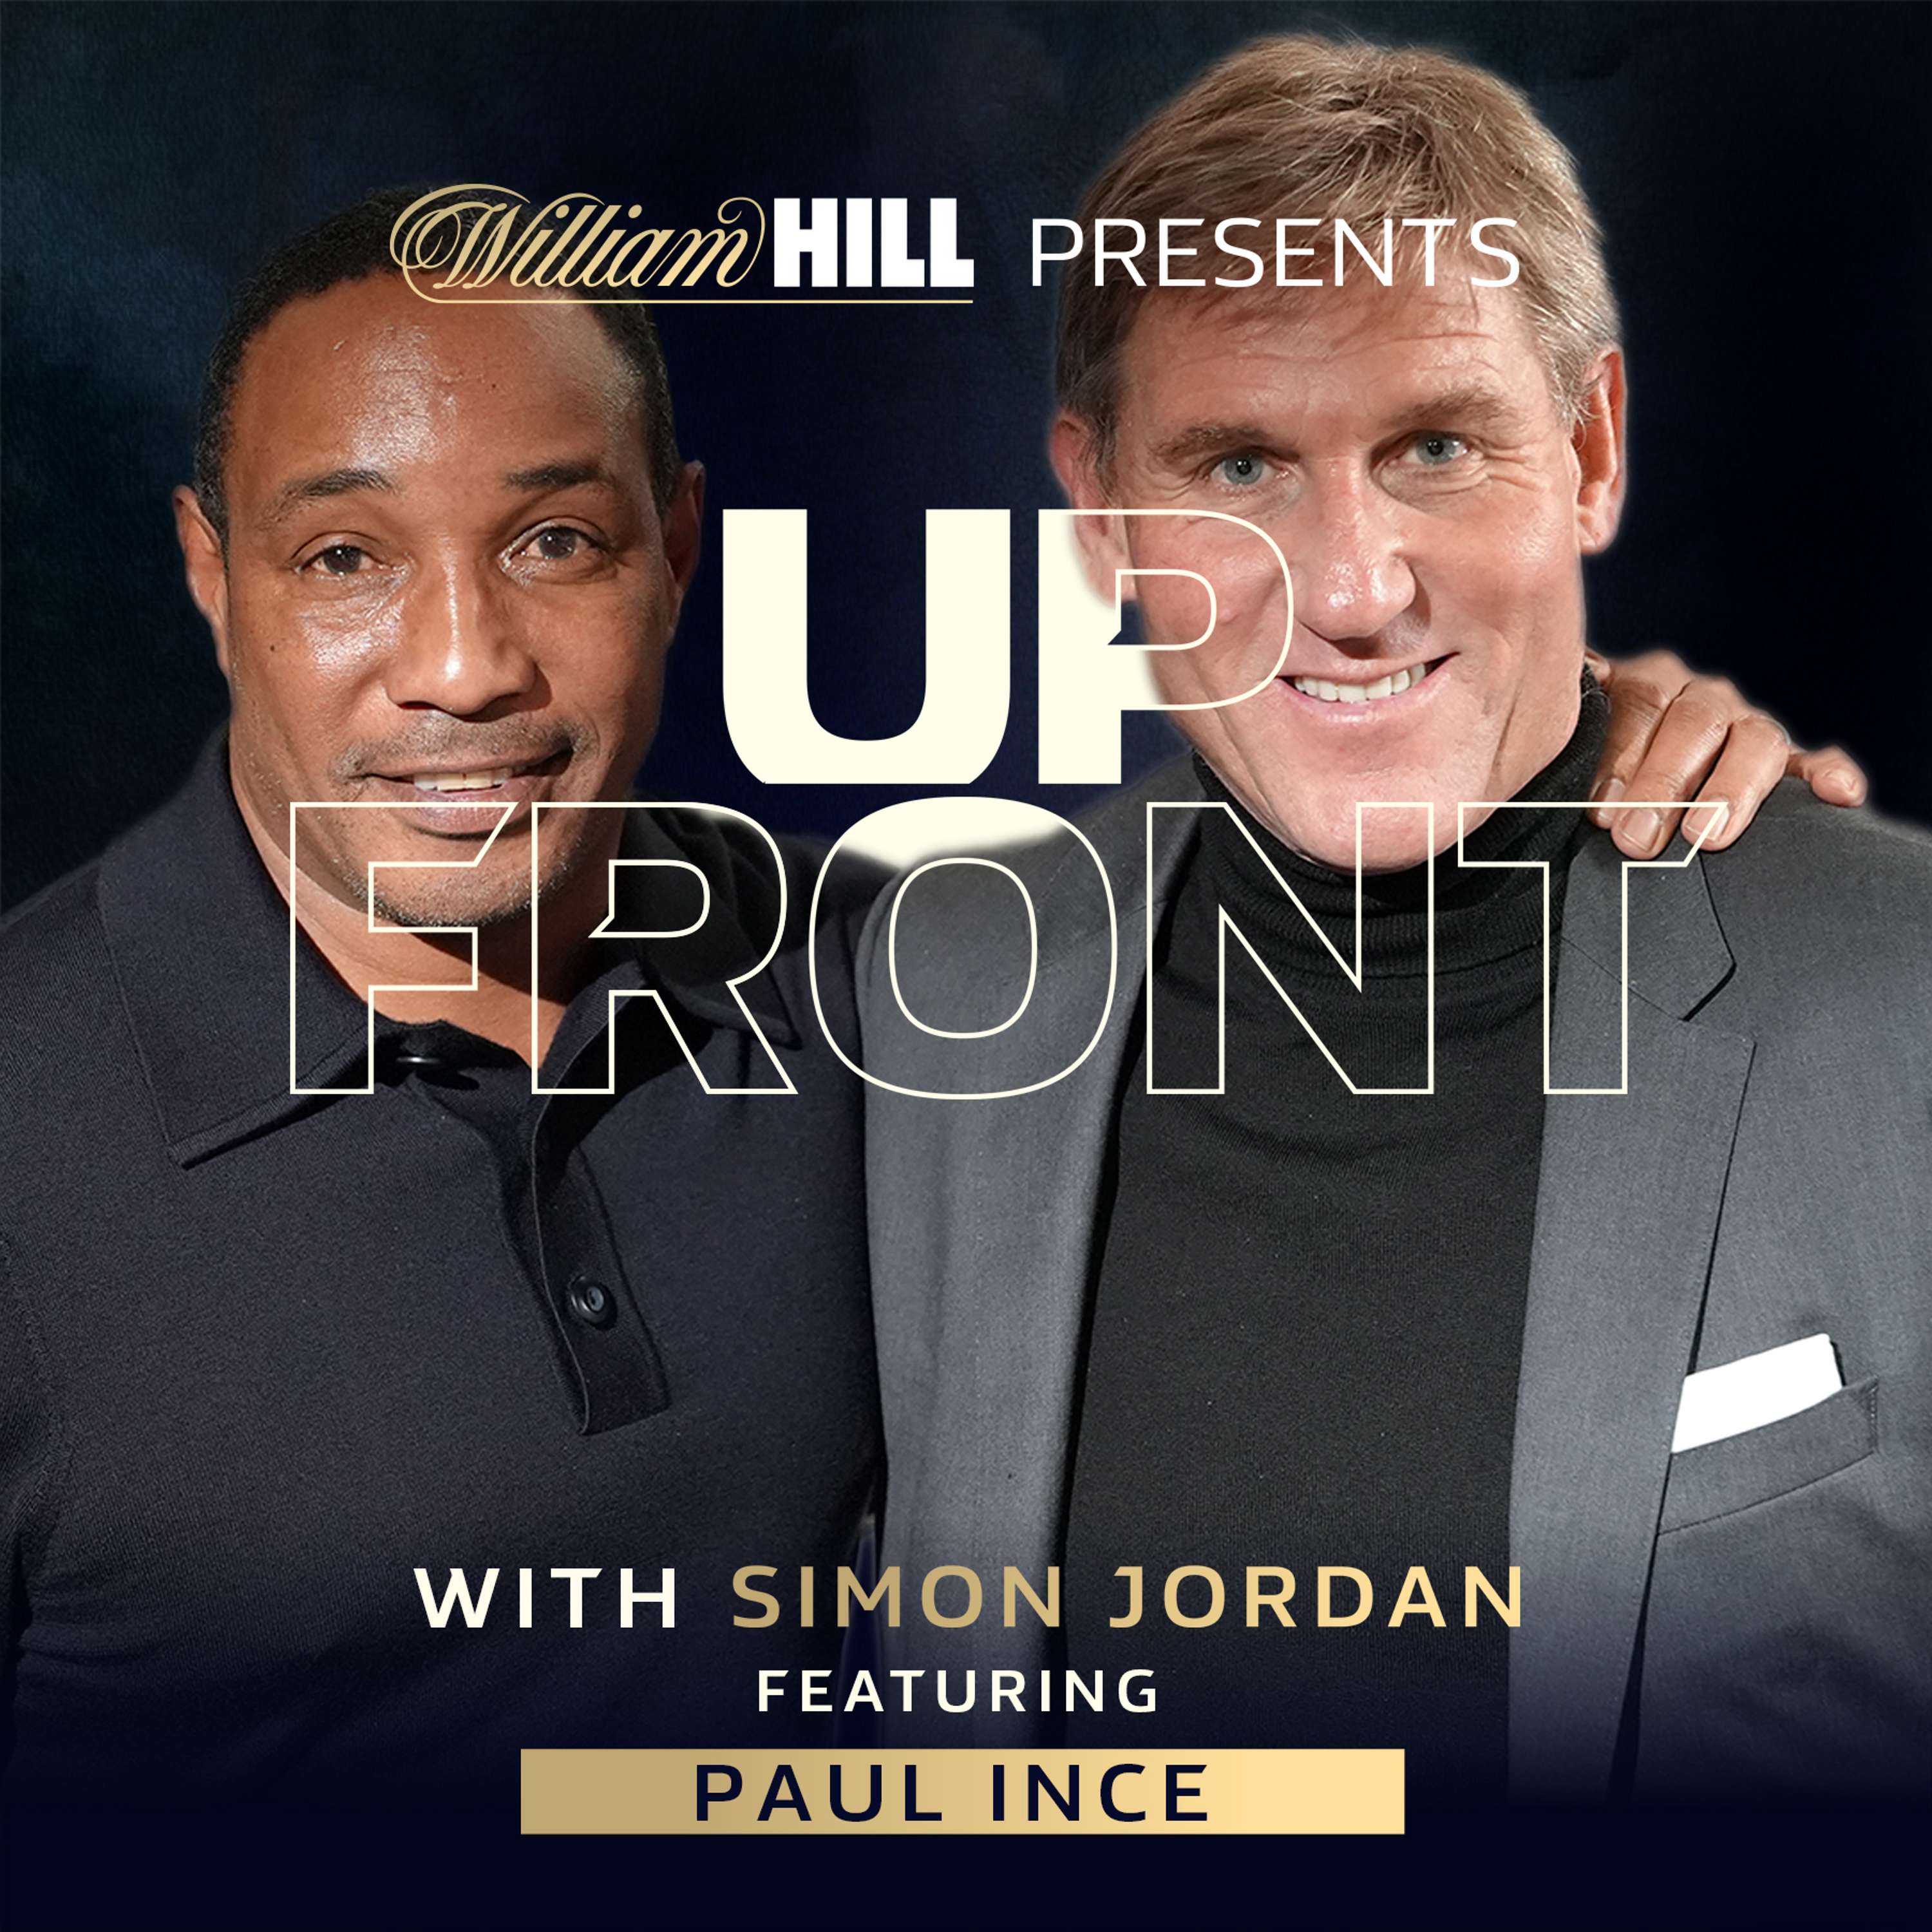 Paul Ince | “Inter Milan was a fresh start for me… I think Rashford needs one too!”